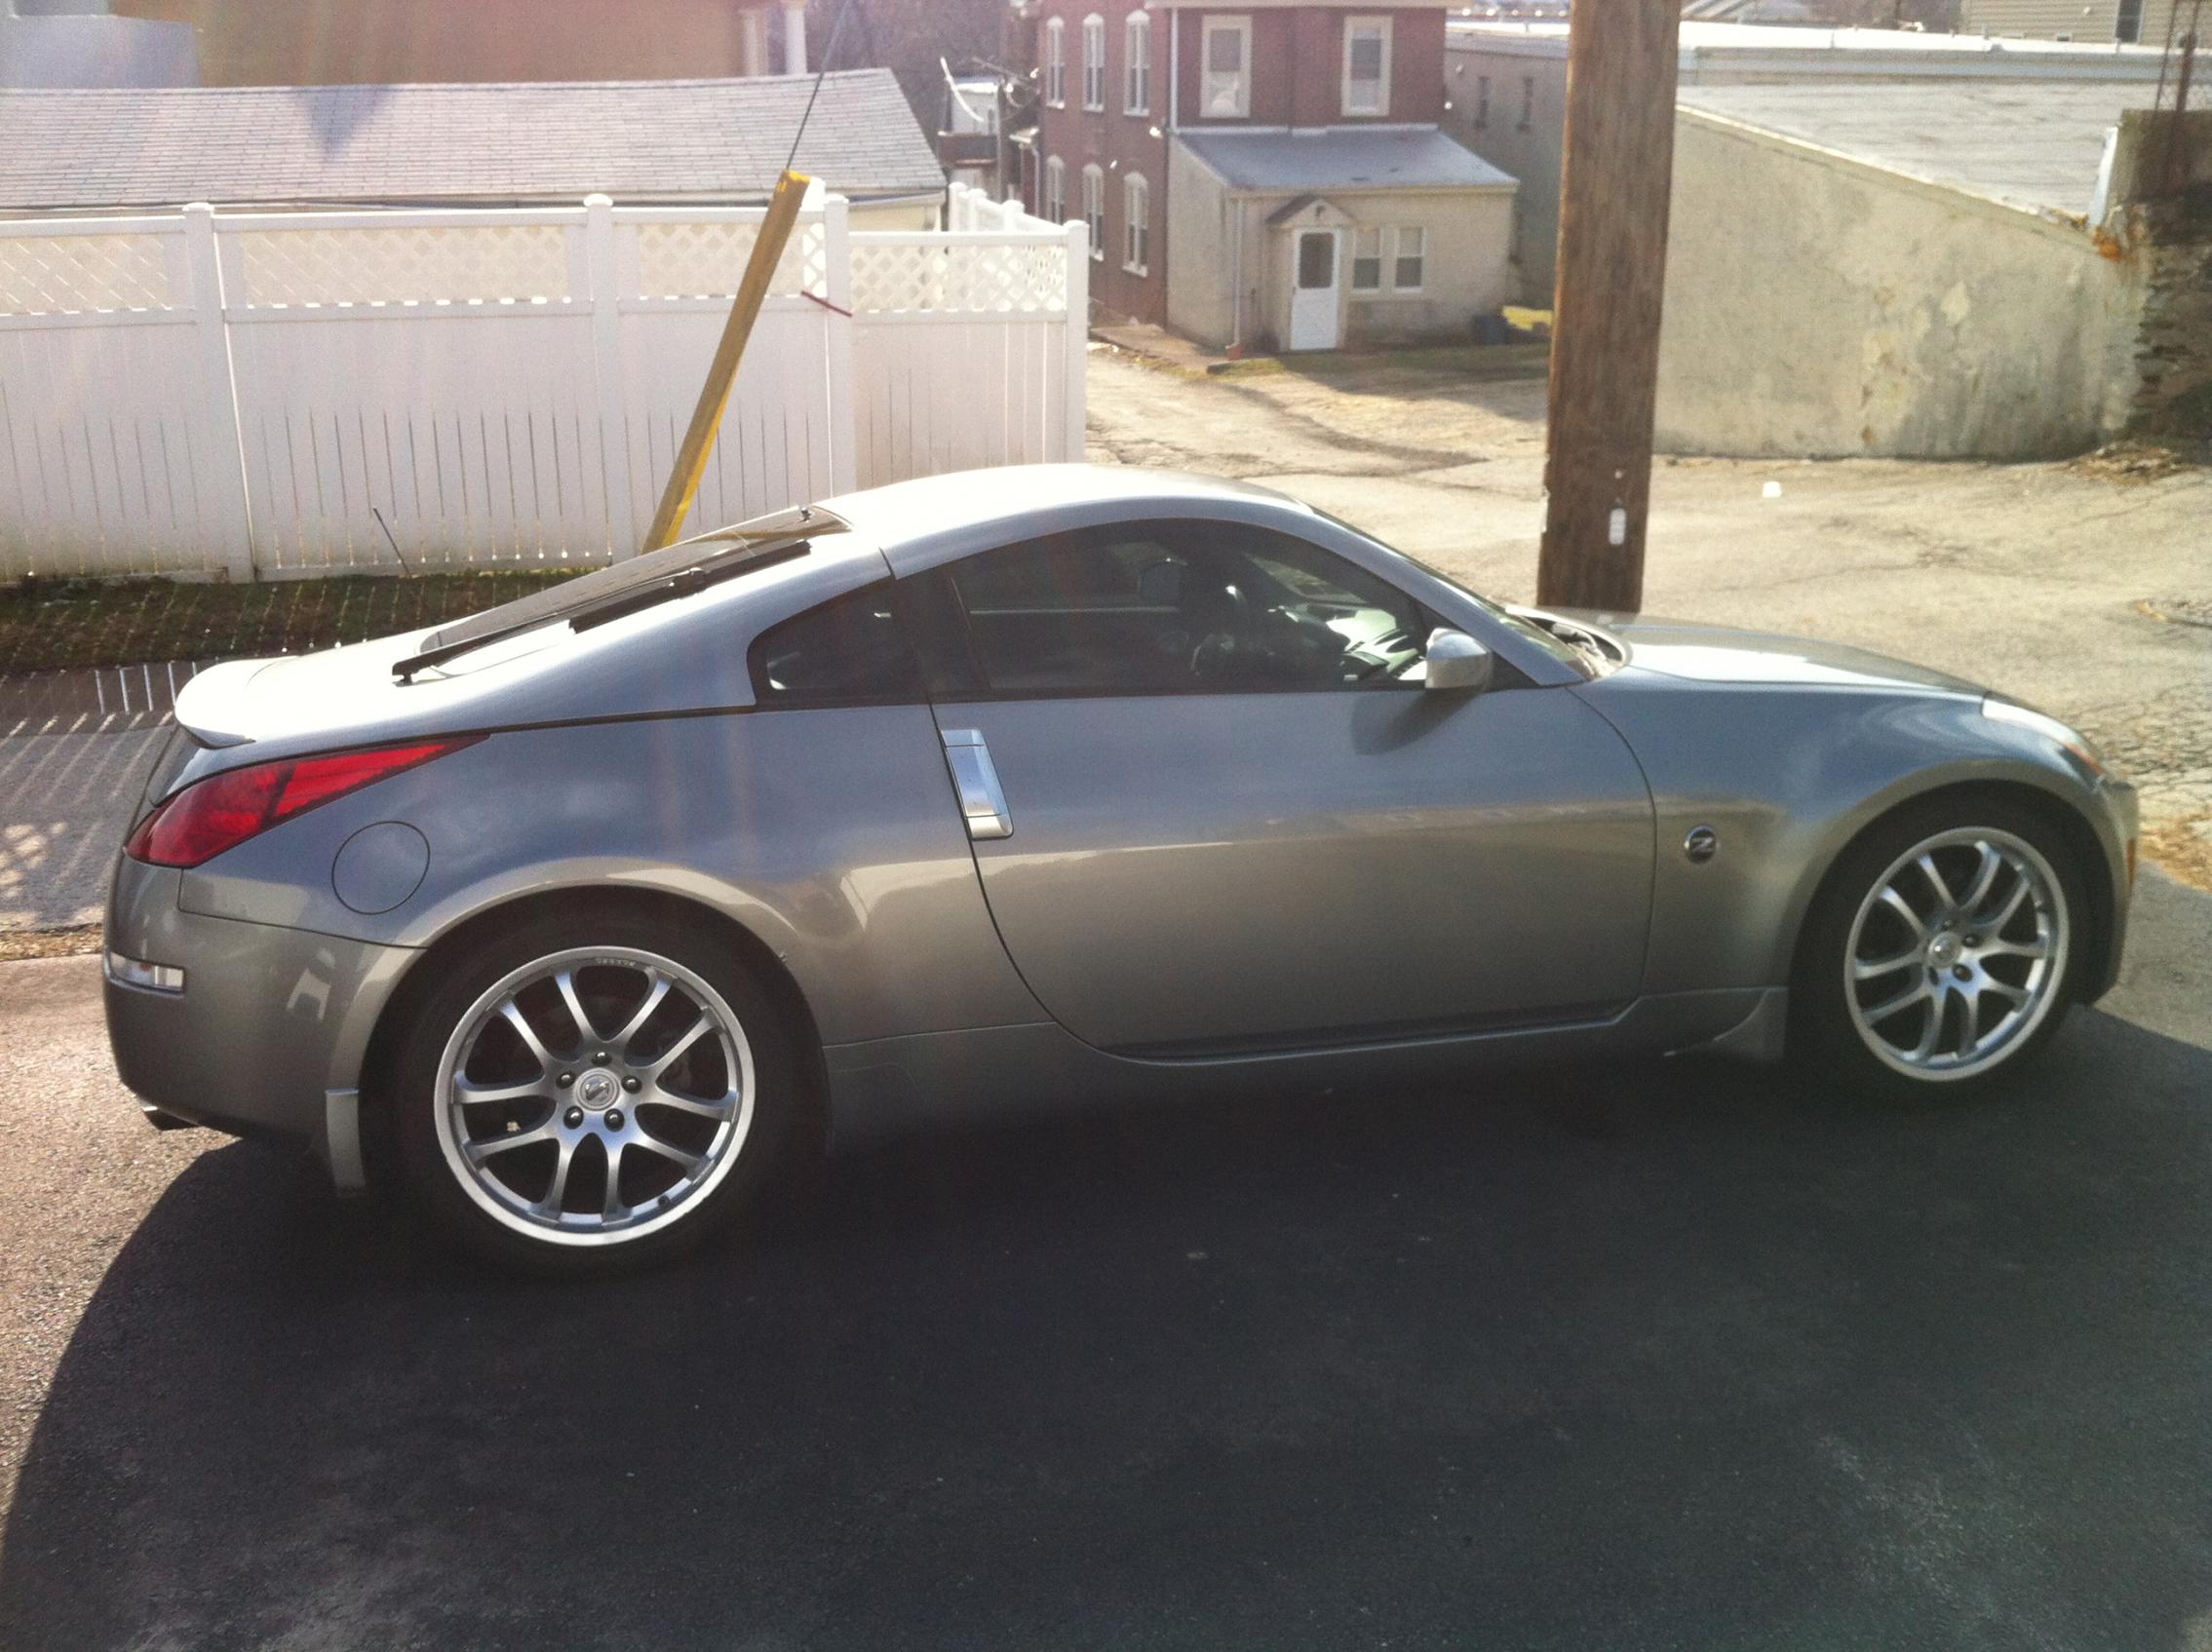 G35 19" Rays Wheels on a 350Z. download. 